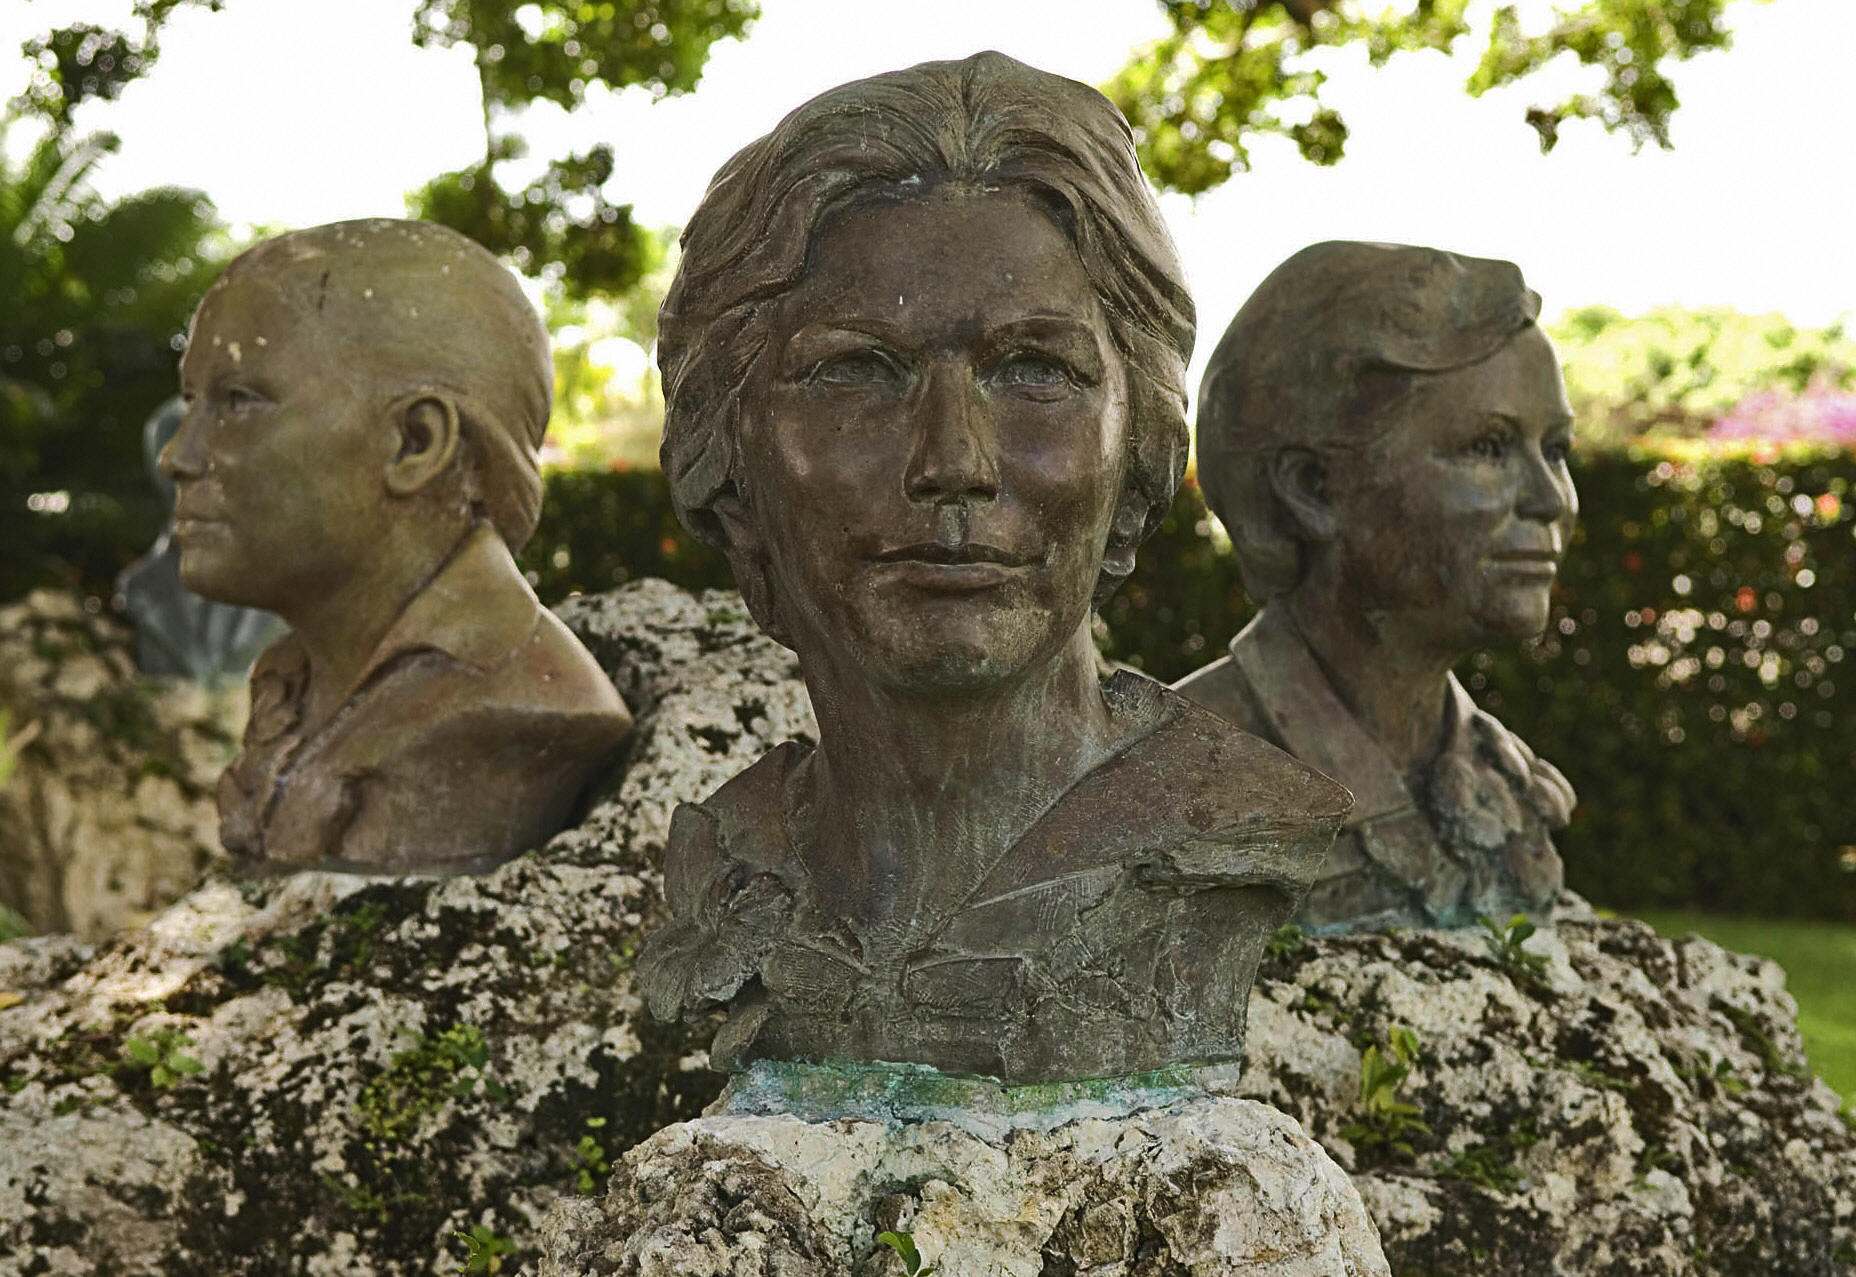 Busts of the Mirabal sisters at the museum in the village of Salcedo, north of Santo Domingo. The Mirabal sisters were assasinated in 1960 during the dictatorial regime of Rafael Trujillo.  (RICARDO HERNANDEZ--AFP/Getty Images) (RICARDO HERNANDEZ&mdash;AFP/Getty Images)